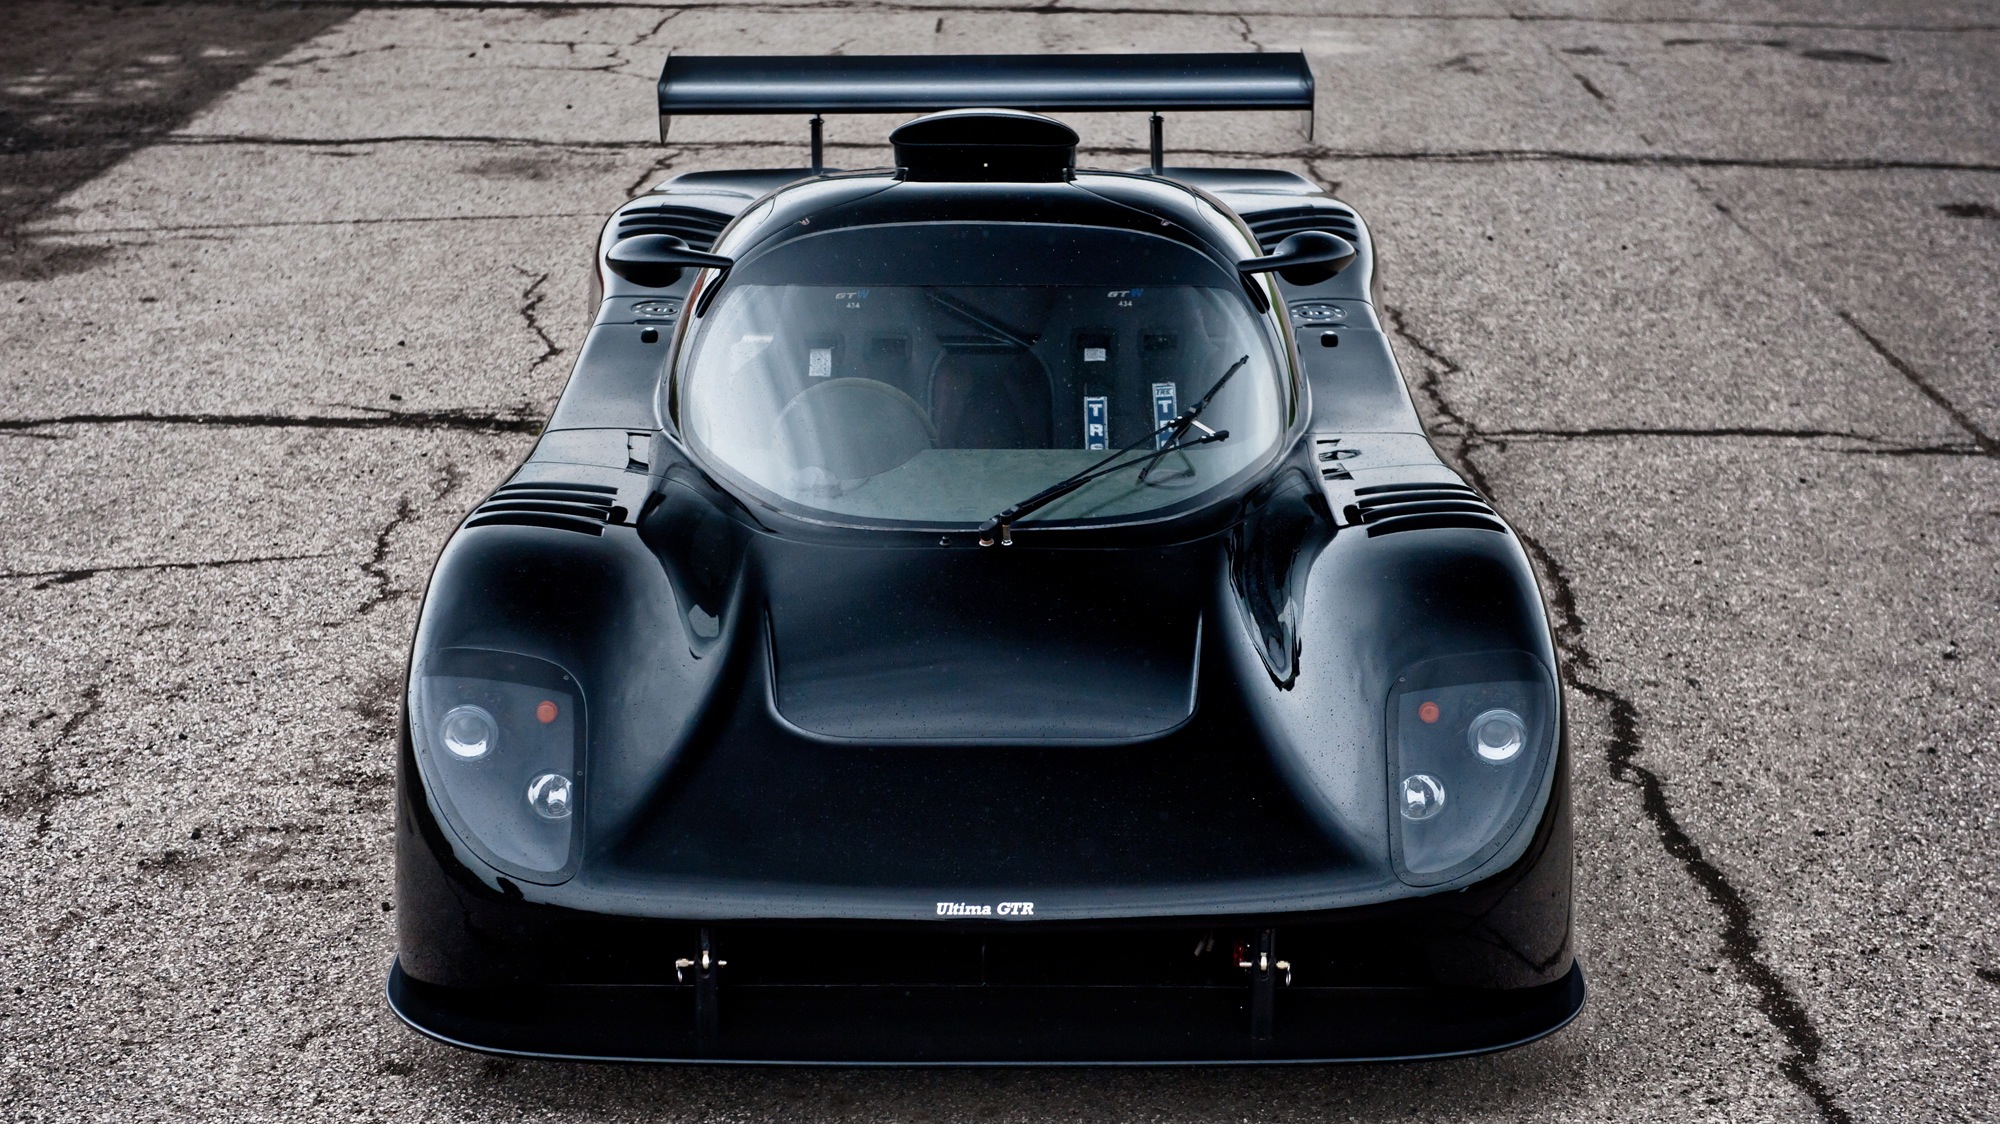 Vehicles Ultima HD Wallpaper | Background Image